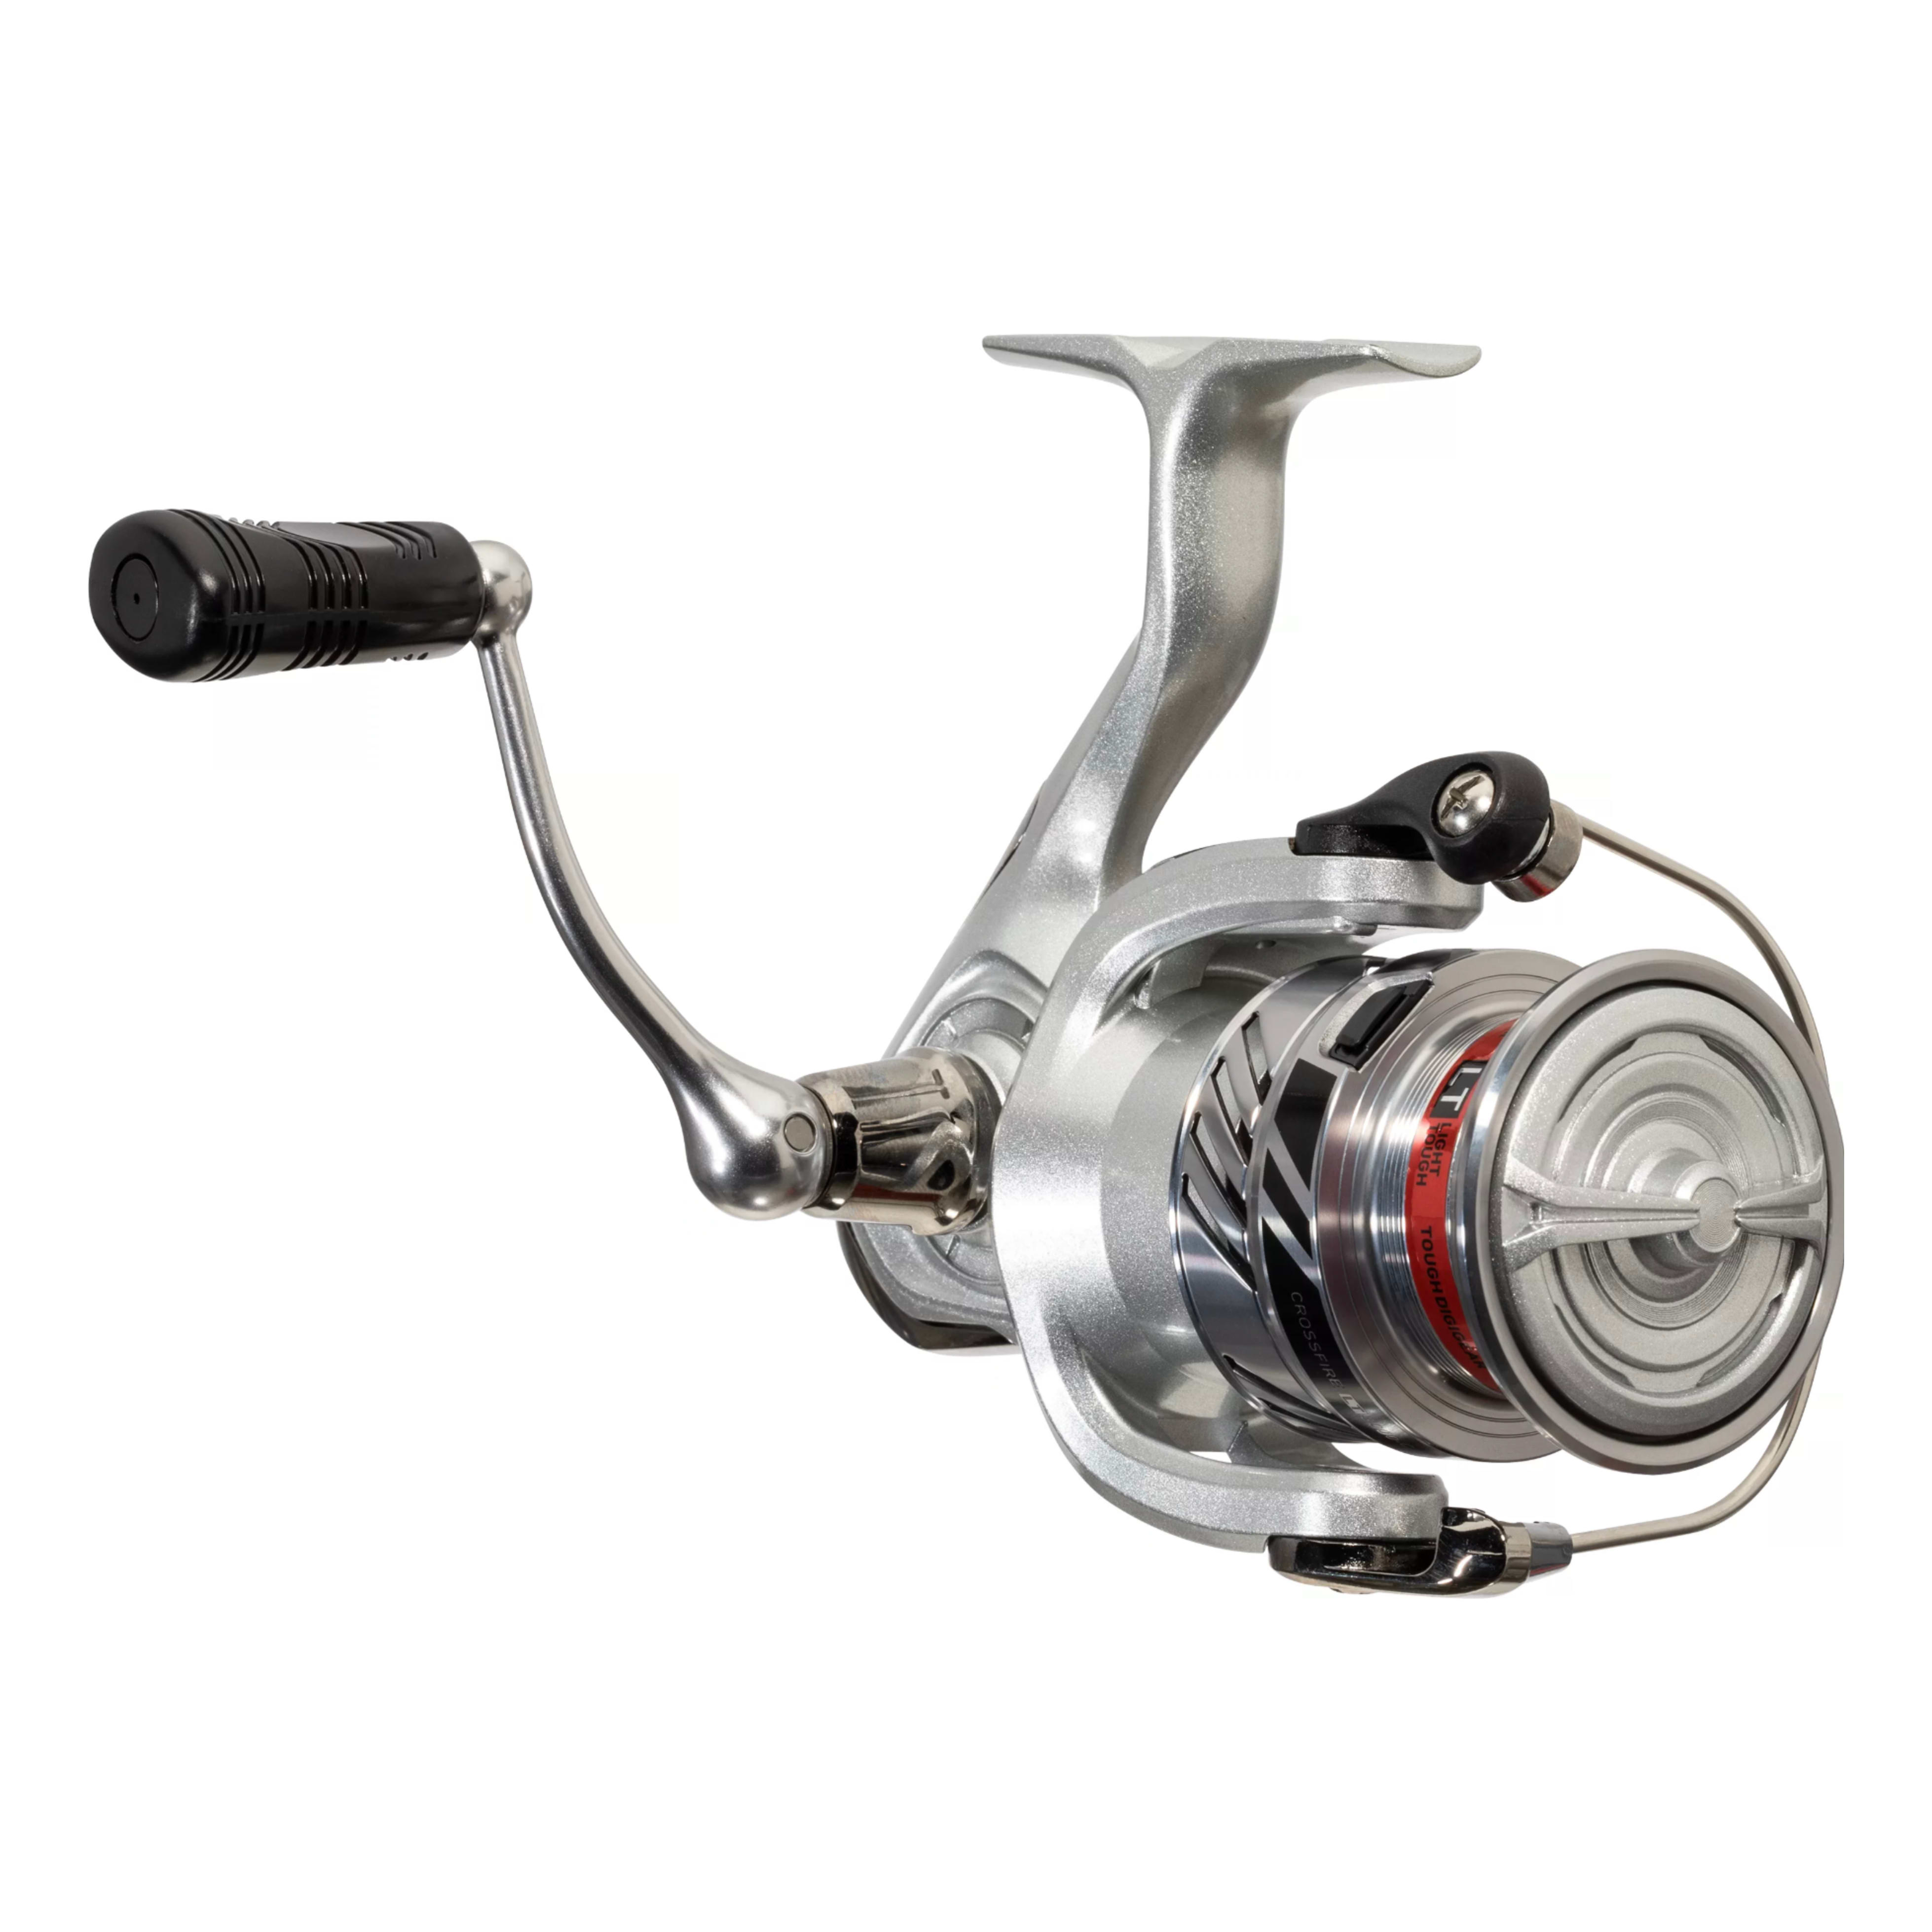 Daiwa Eliminator 3000 Spinning Reel - FOR PARTS OR REPAIR ONLY